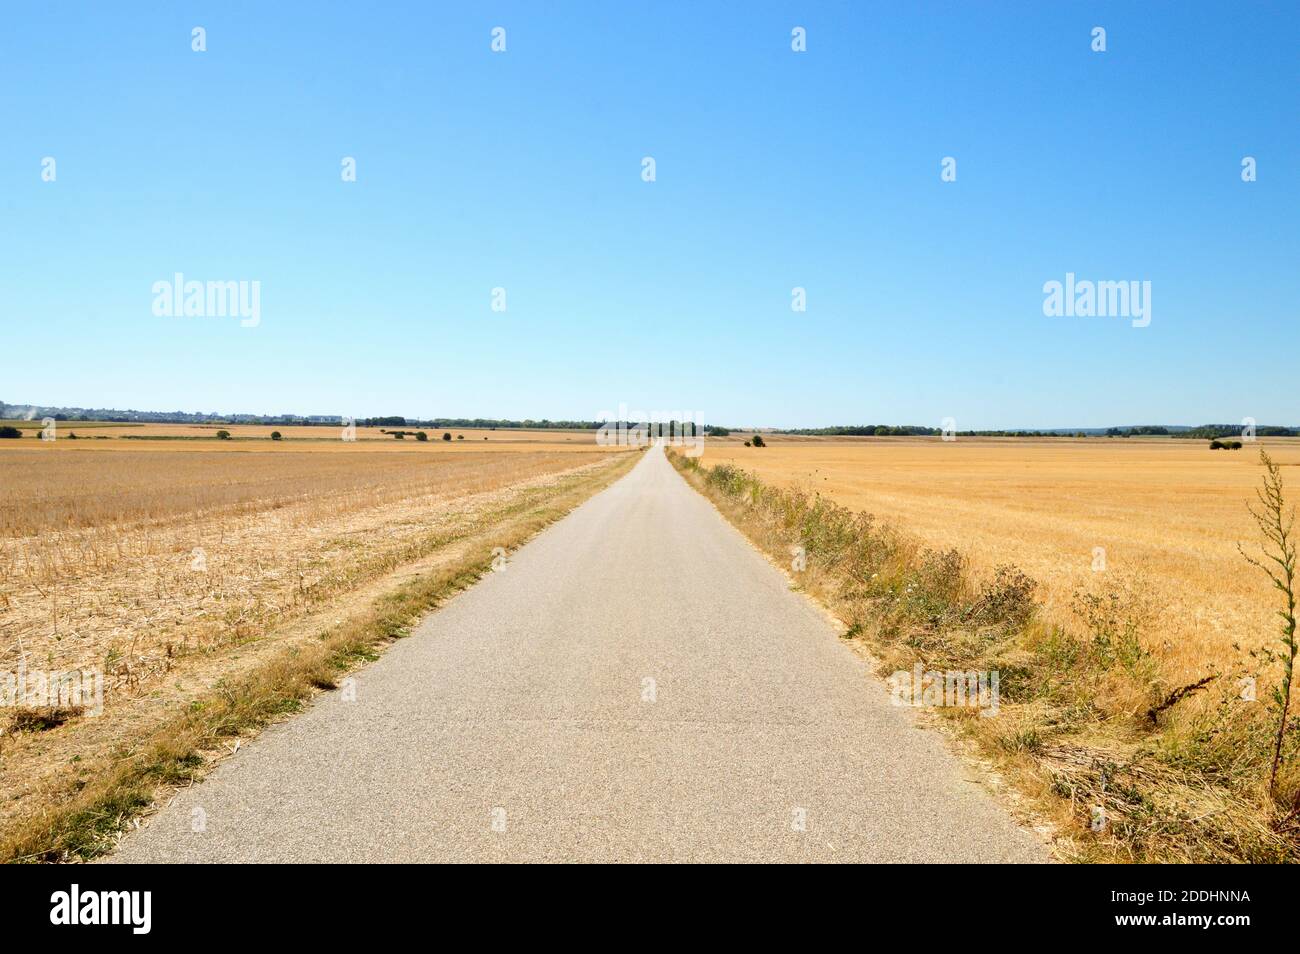 Dry plain during a heat wave and yellowed by the drought. Stock Photo